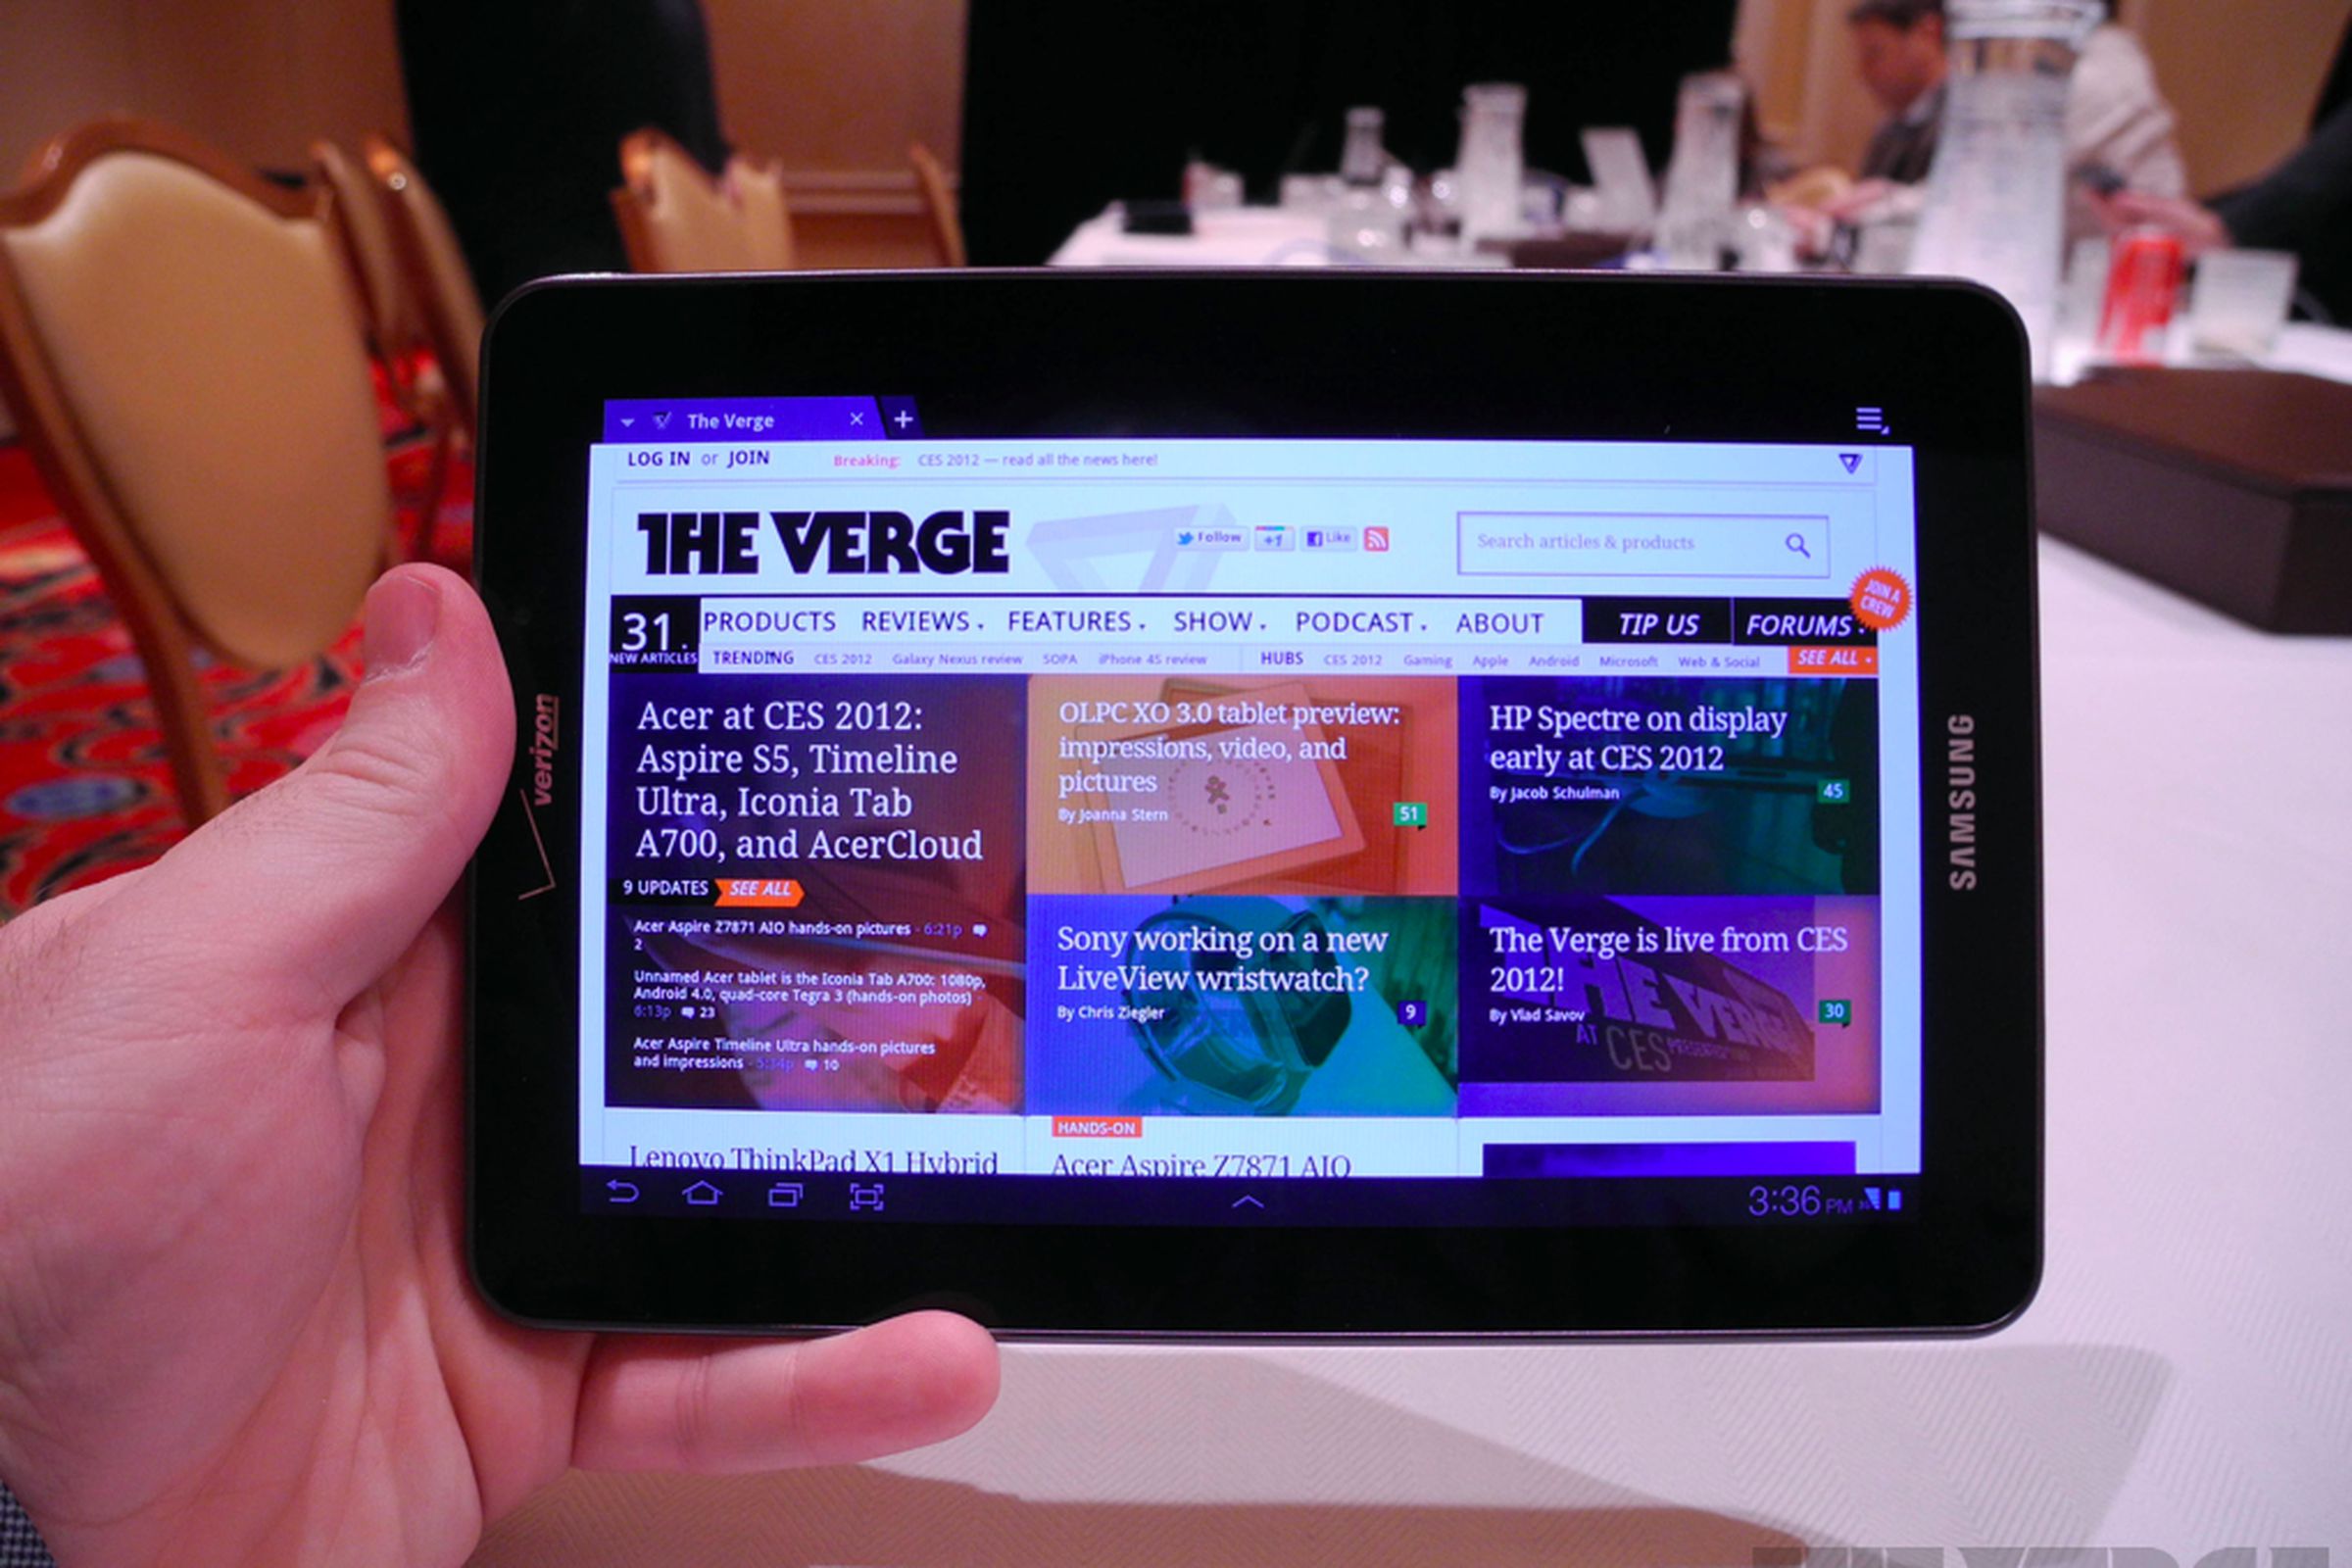 Gallery Photo: Samsung Galaxy Tab 7.7 for Verizon hands-on pictures